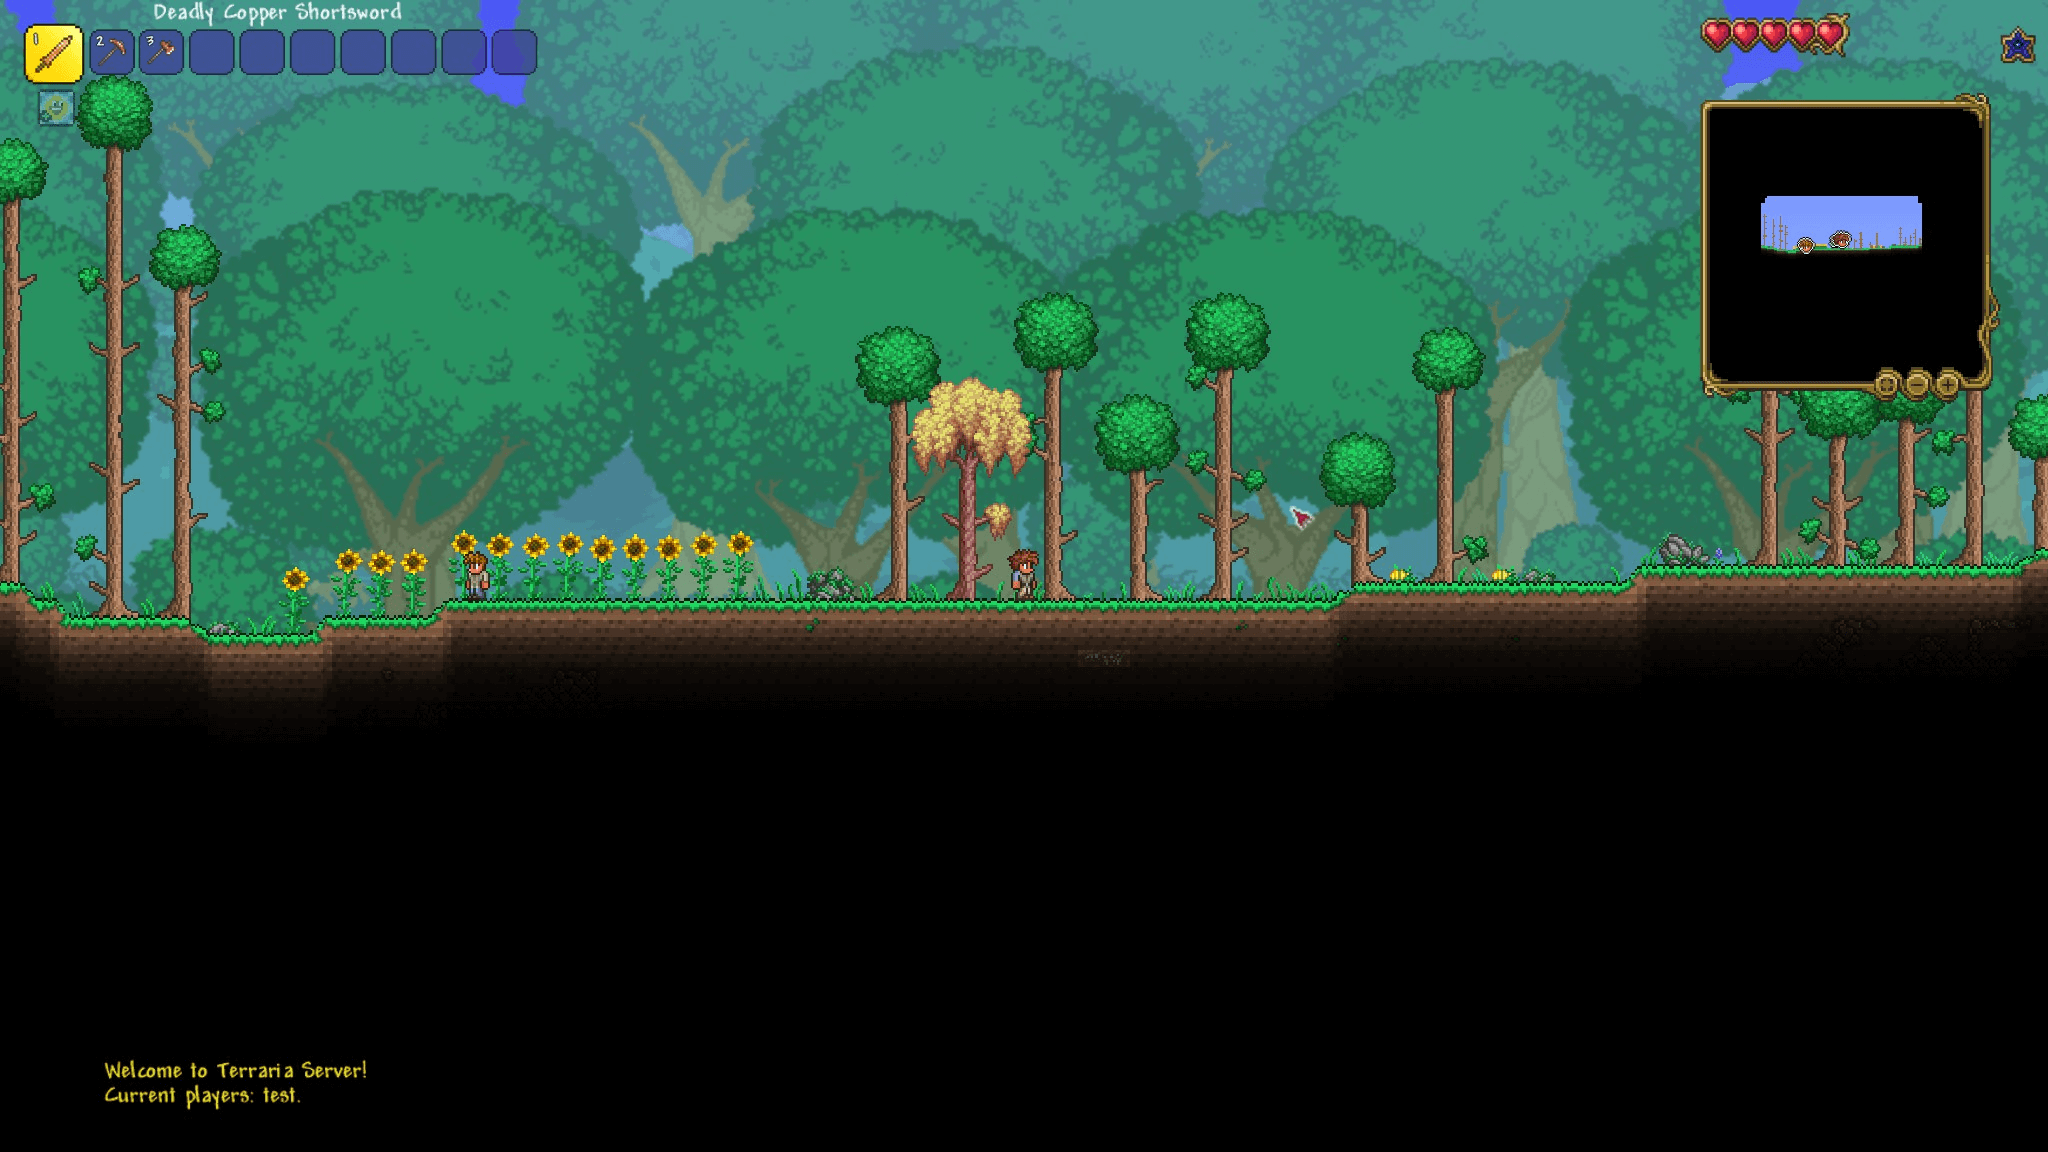 Terraria' cross-play is in the works but not guaranteed